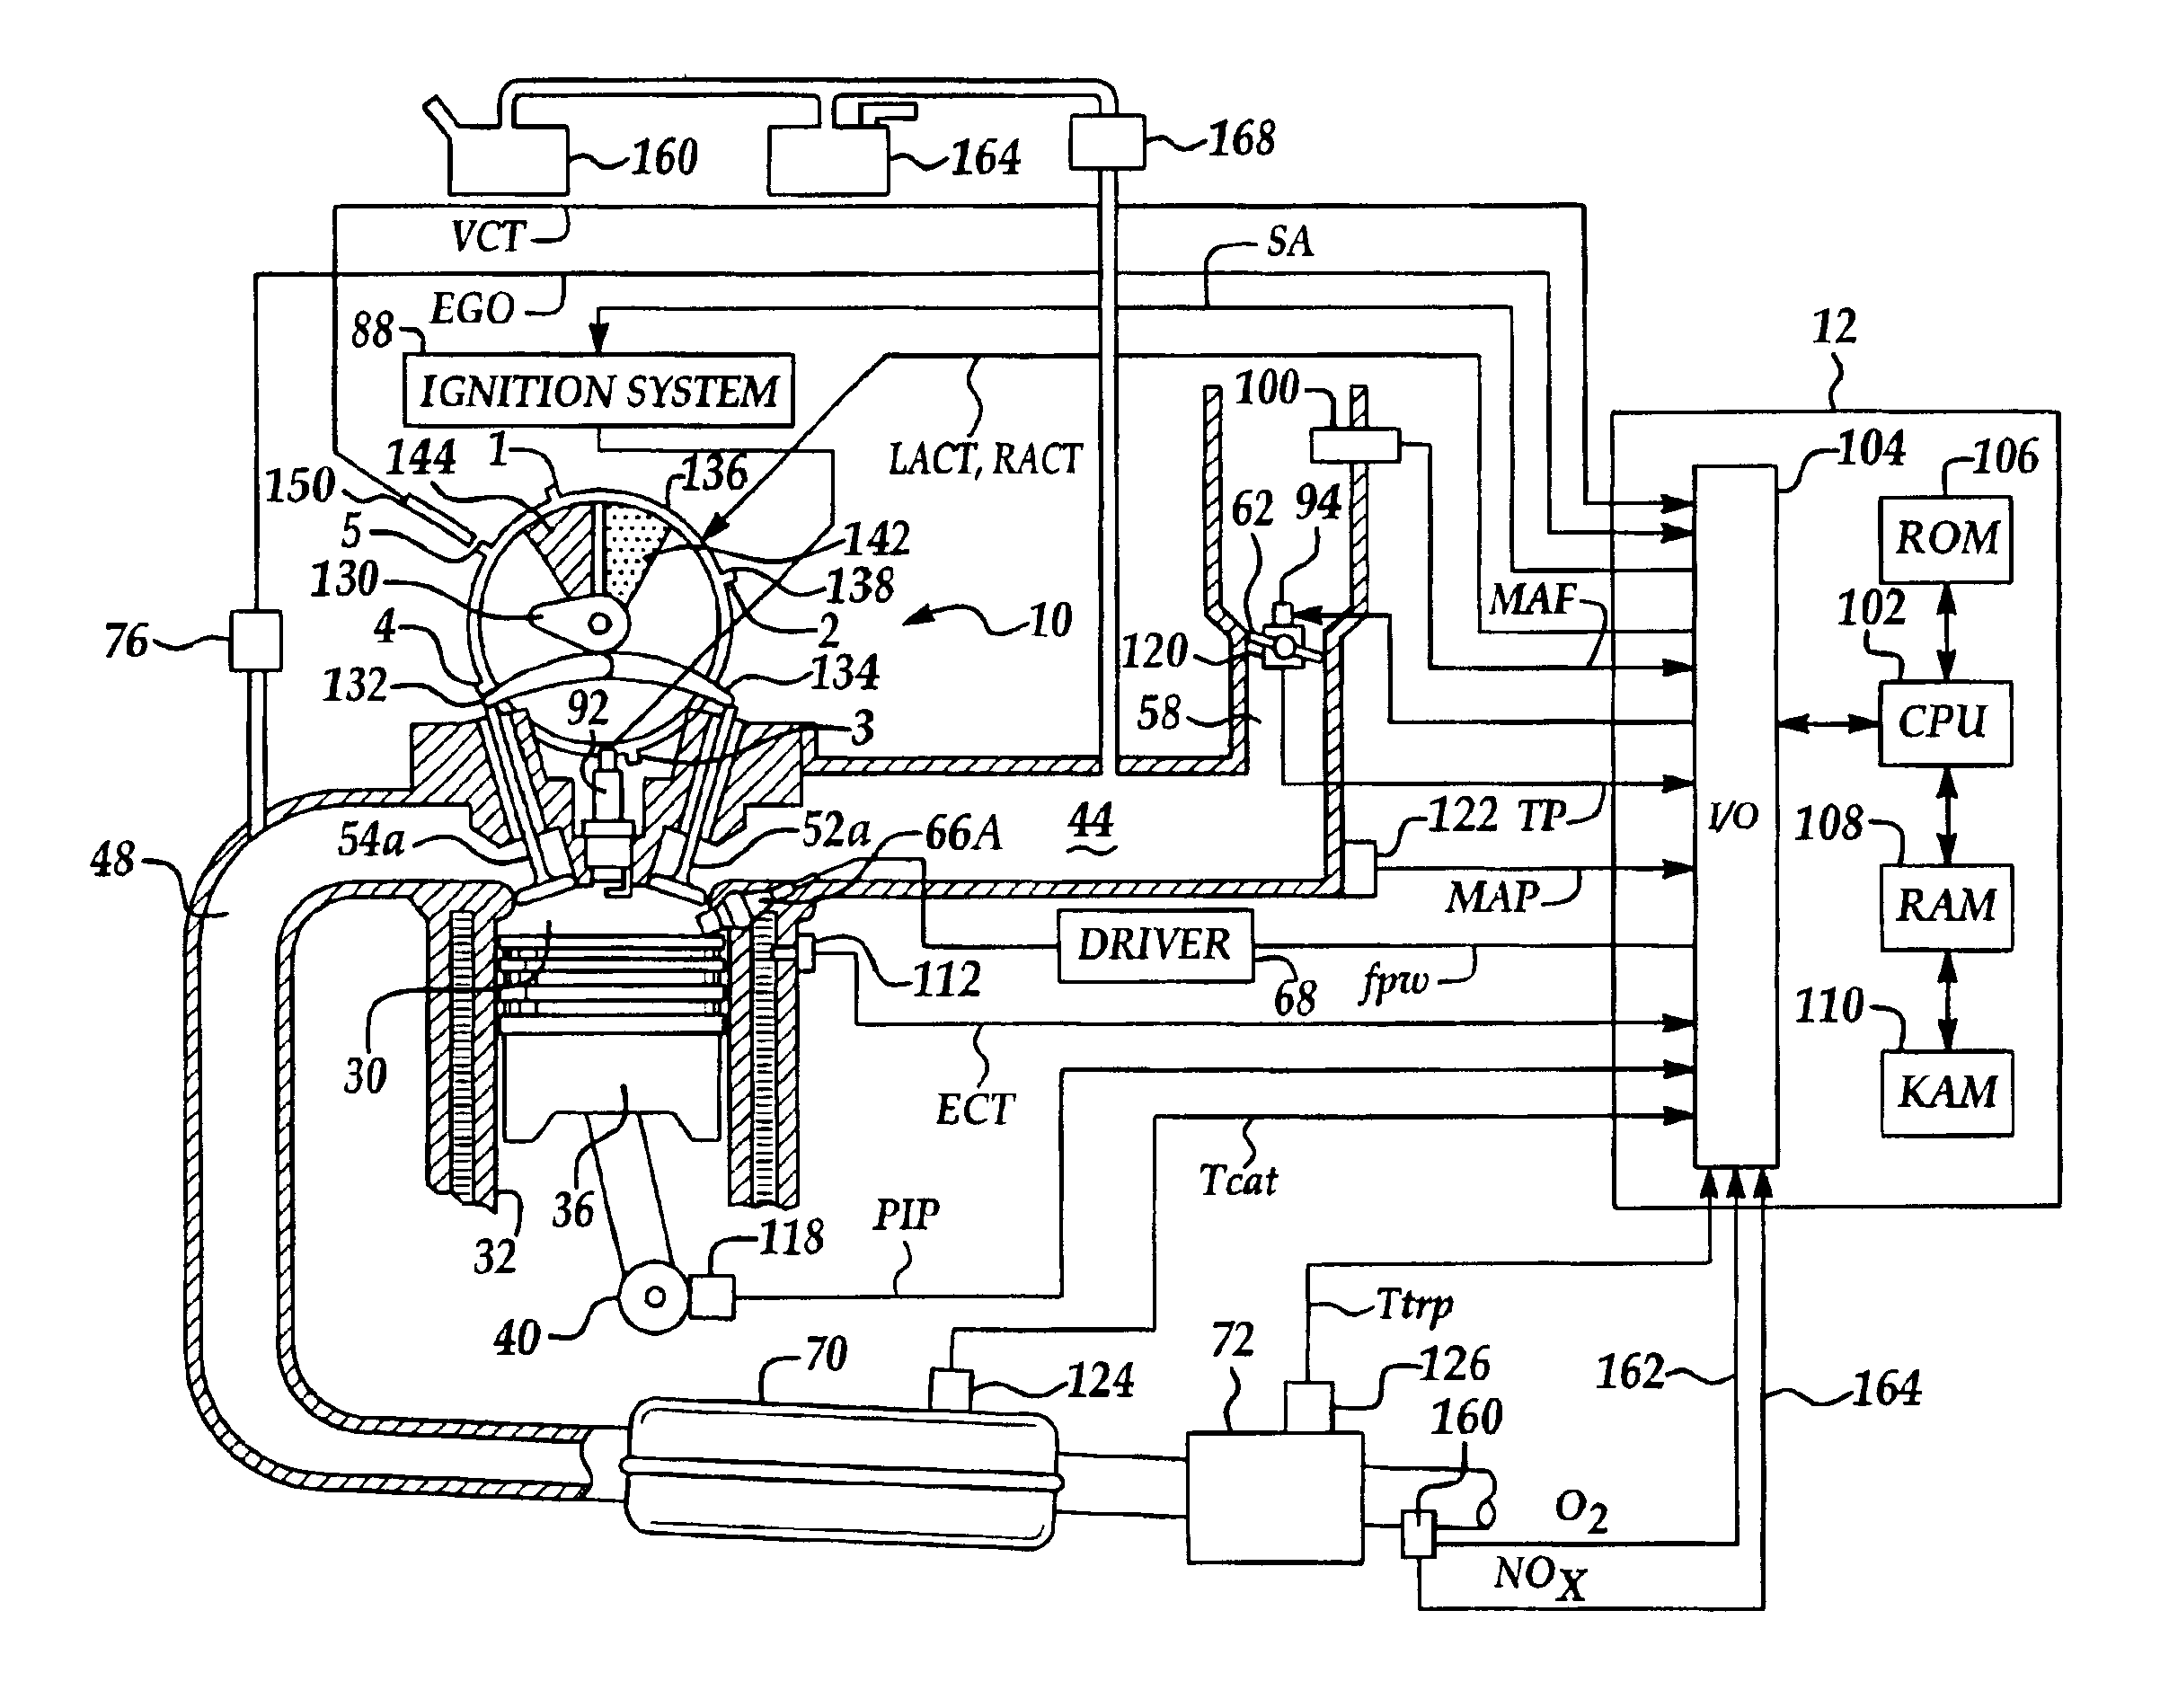 Method to control transitions between modes of operation of an engine